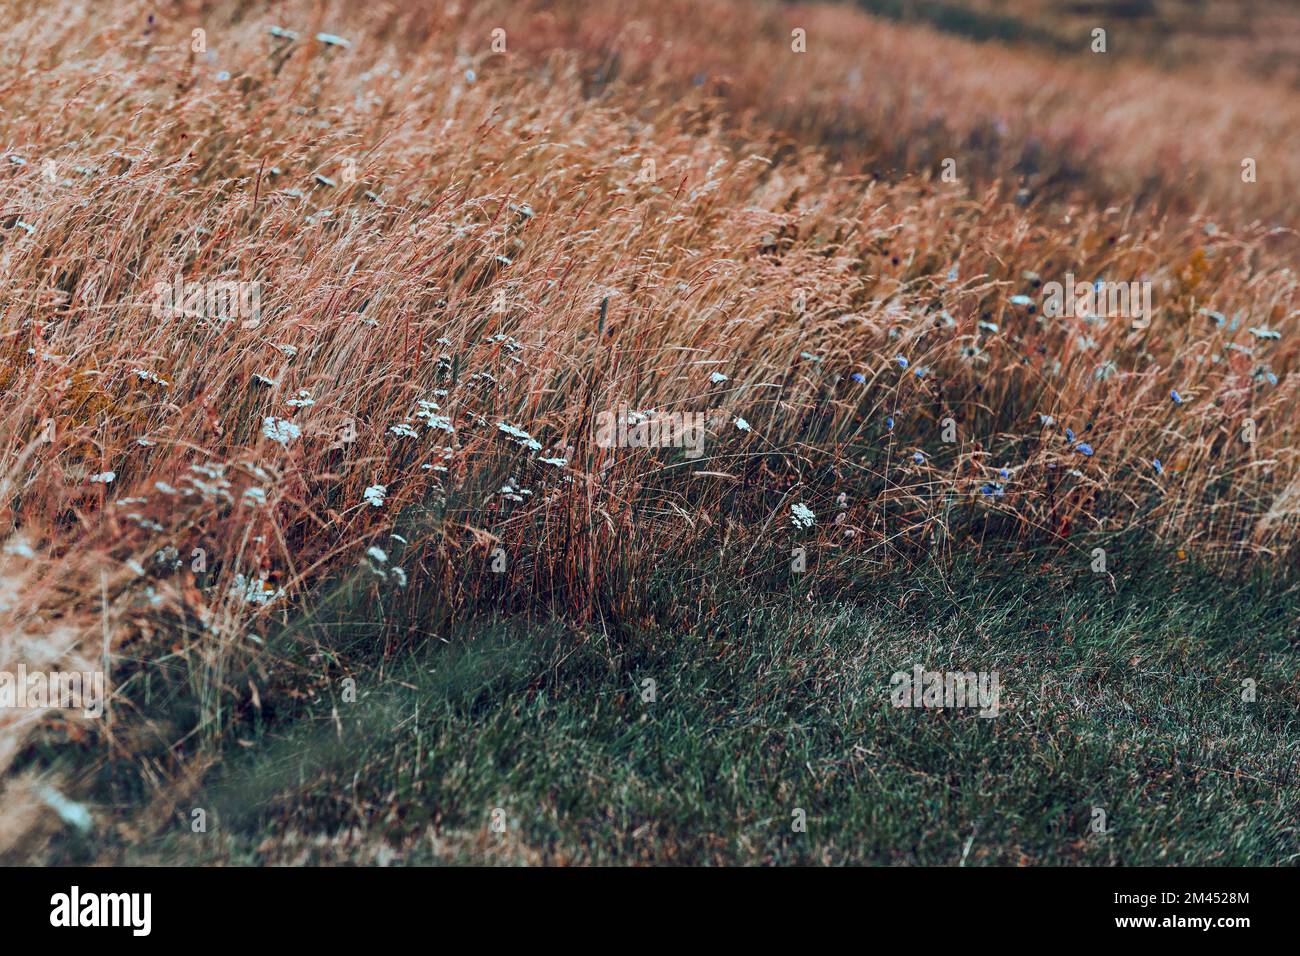 The small white and blue flowers in a needlegrass field during windy weather Stock Photo